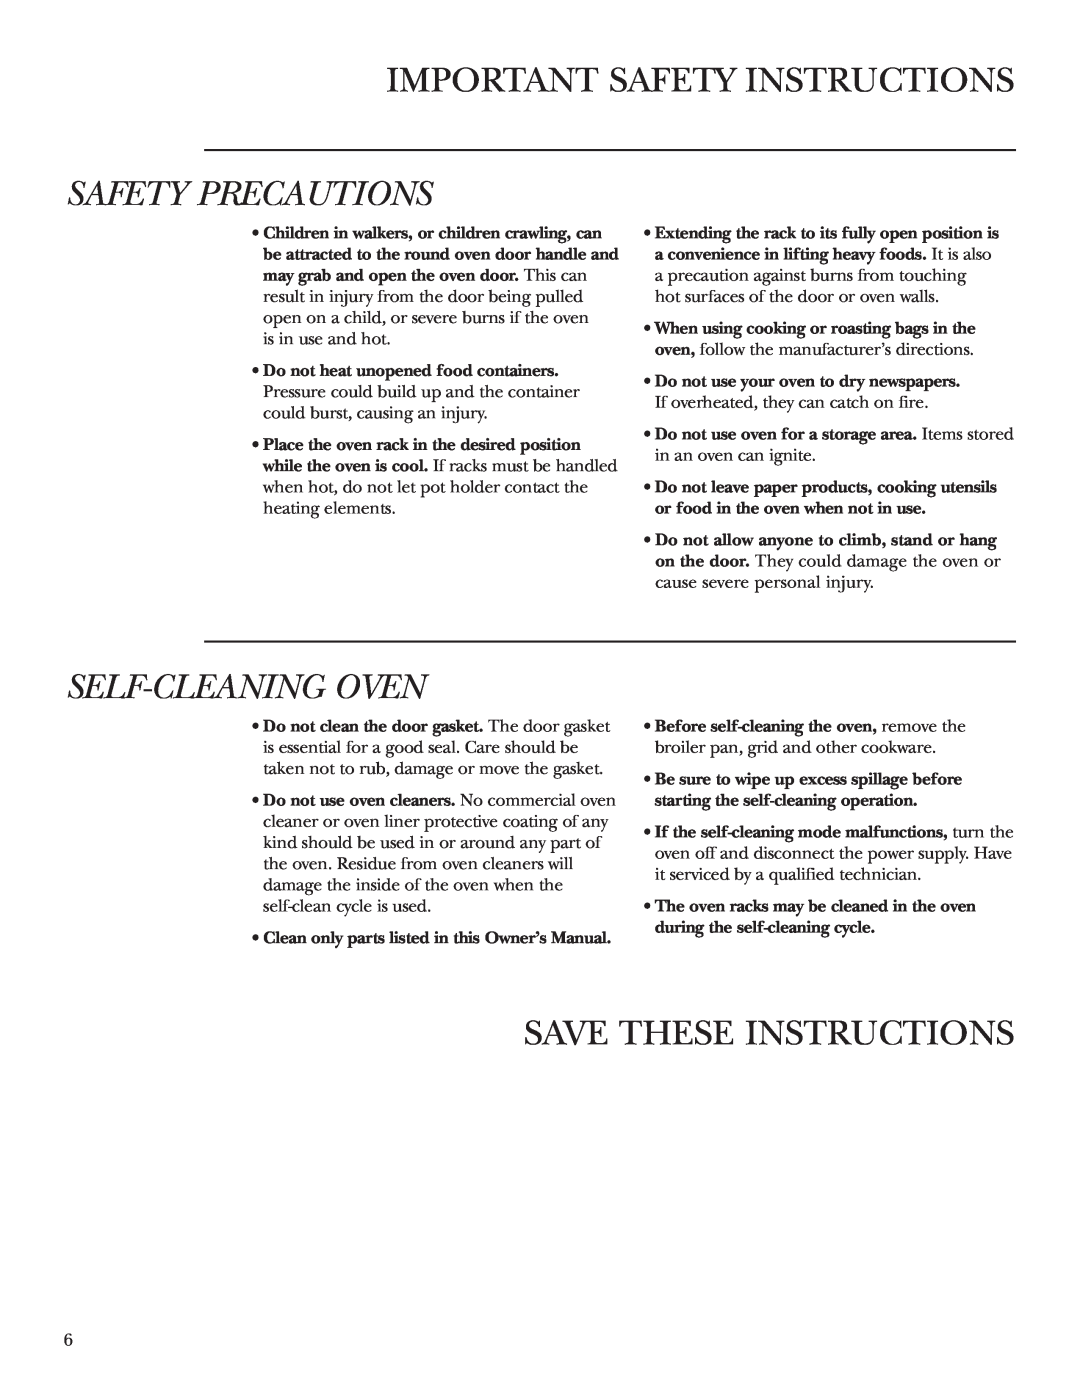 GE ZET2R, ZET1R owner manual Important Safety Instructions, Safety Precautions, Self-Cleaningoven, Save These Instructions 